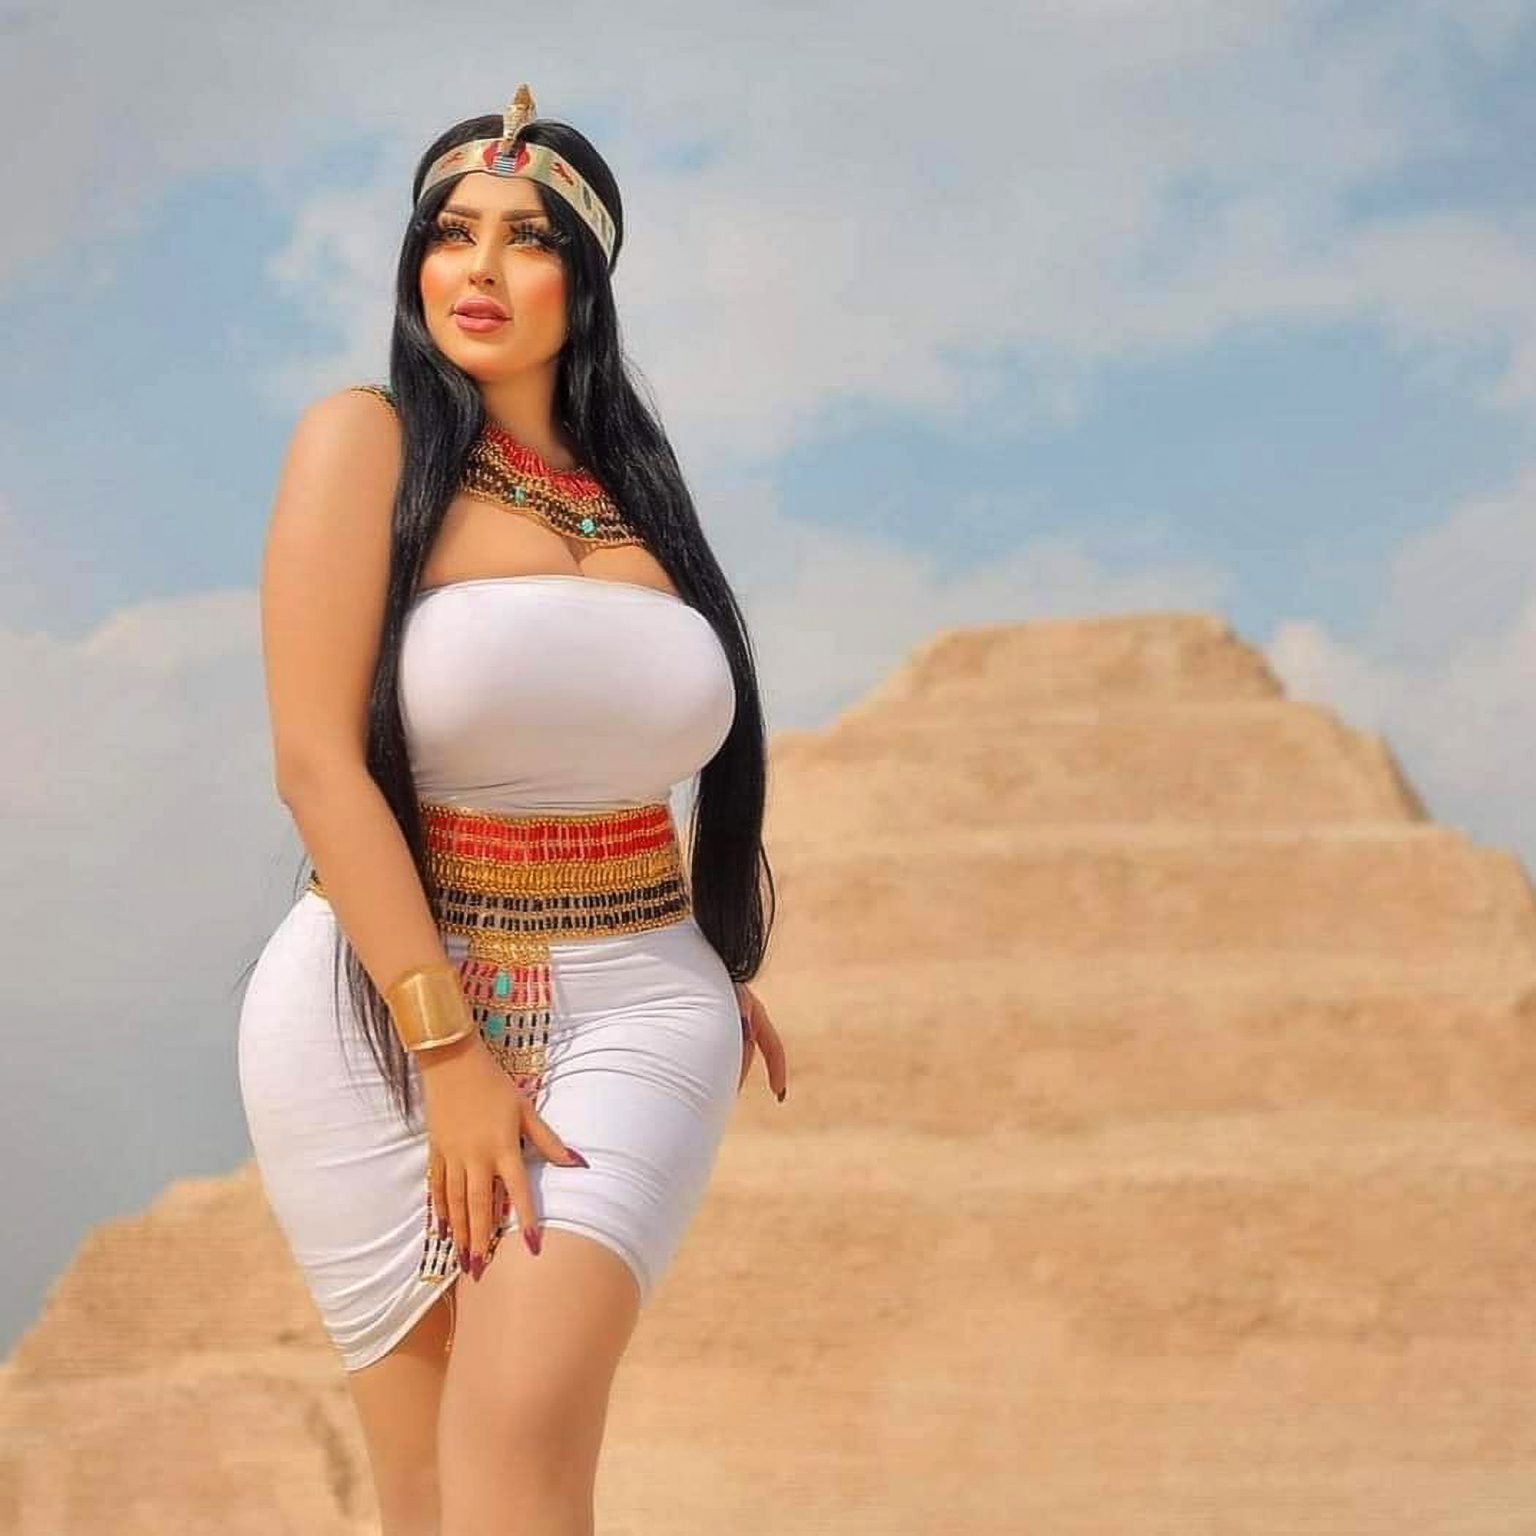 Photographer Claims Curvy Cleopatra In Egypt Pyramid Shoot Only Arrested Because She Is Plus Size